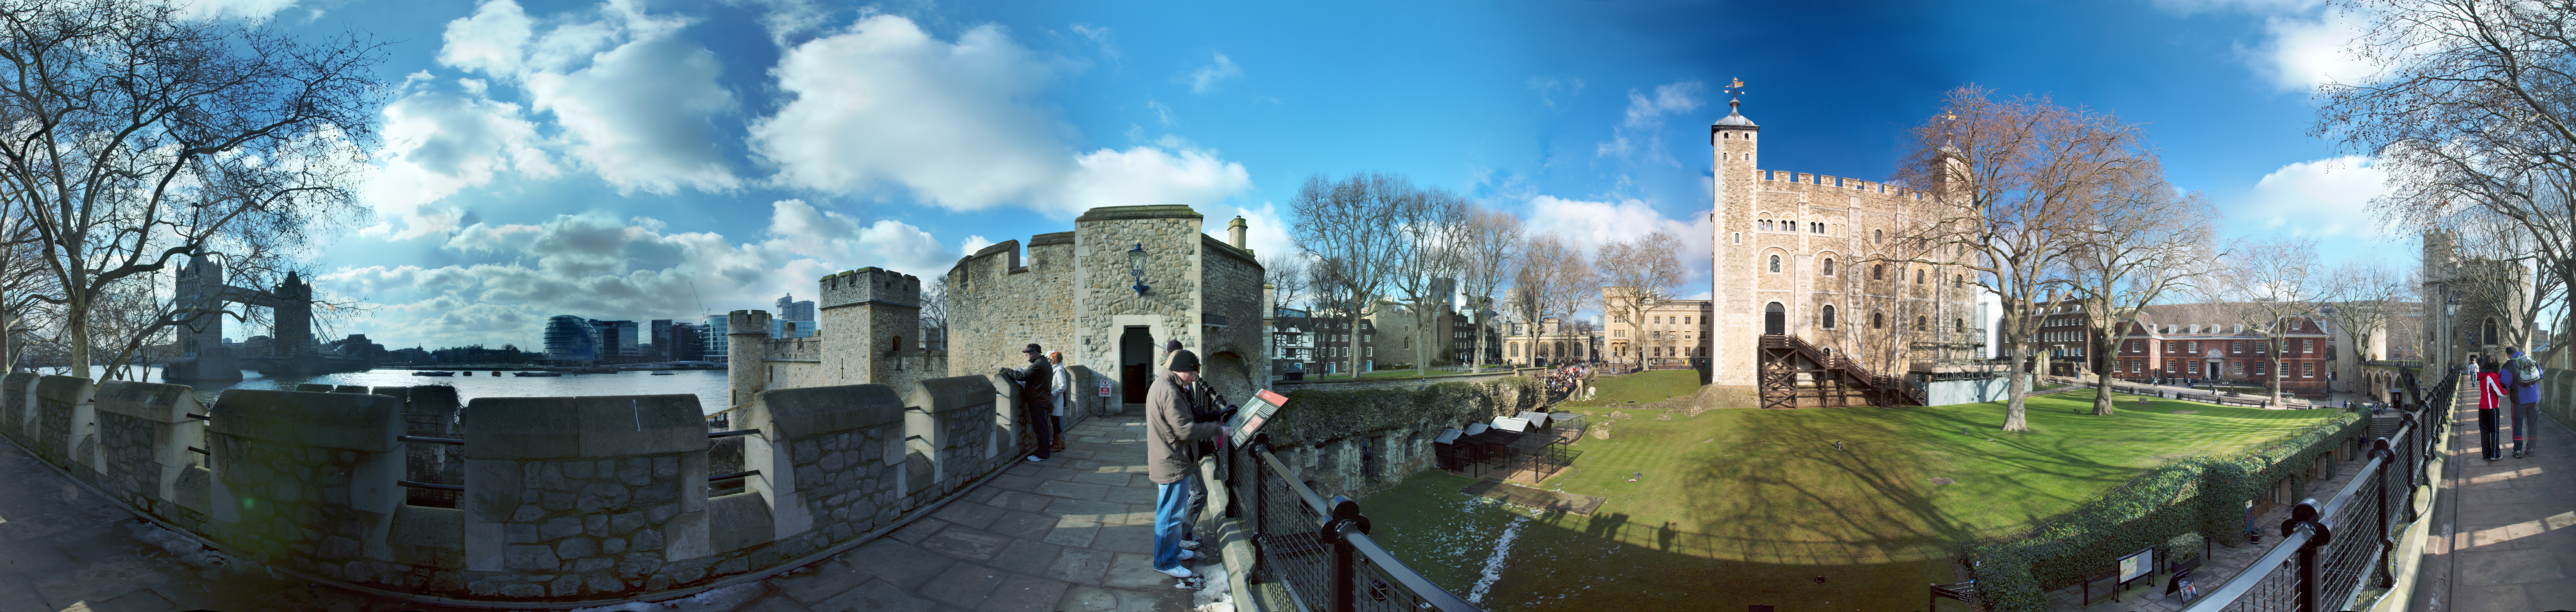 File:Panoramic view from Tower of London.jpg - Wikimedia Commons